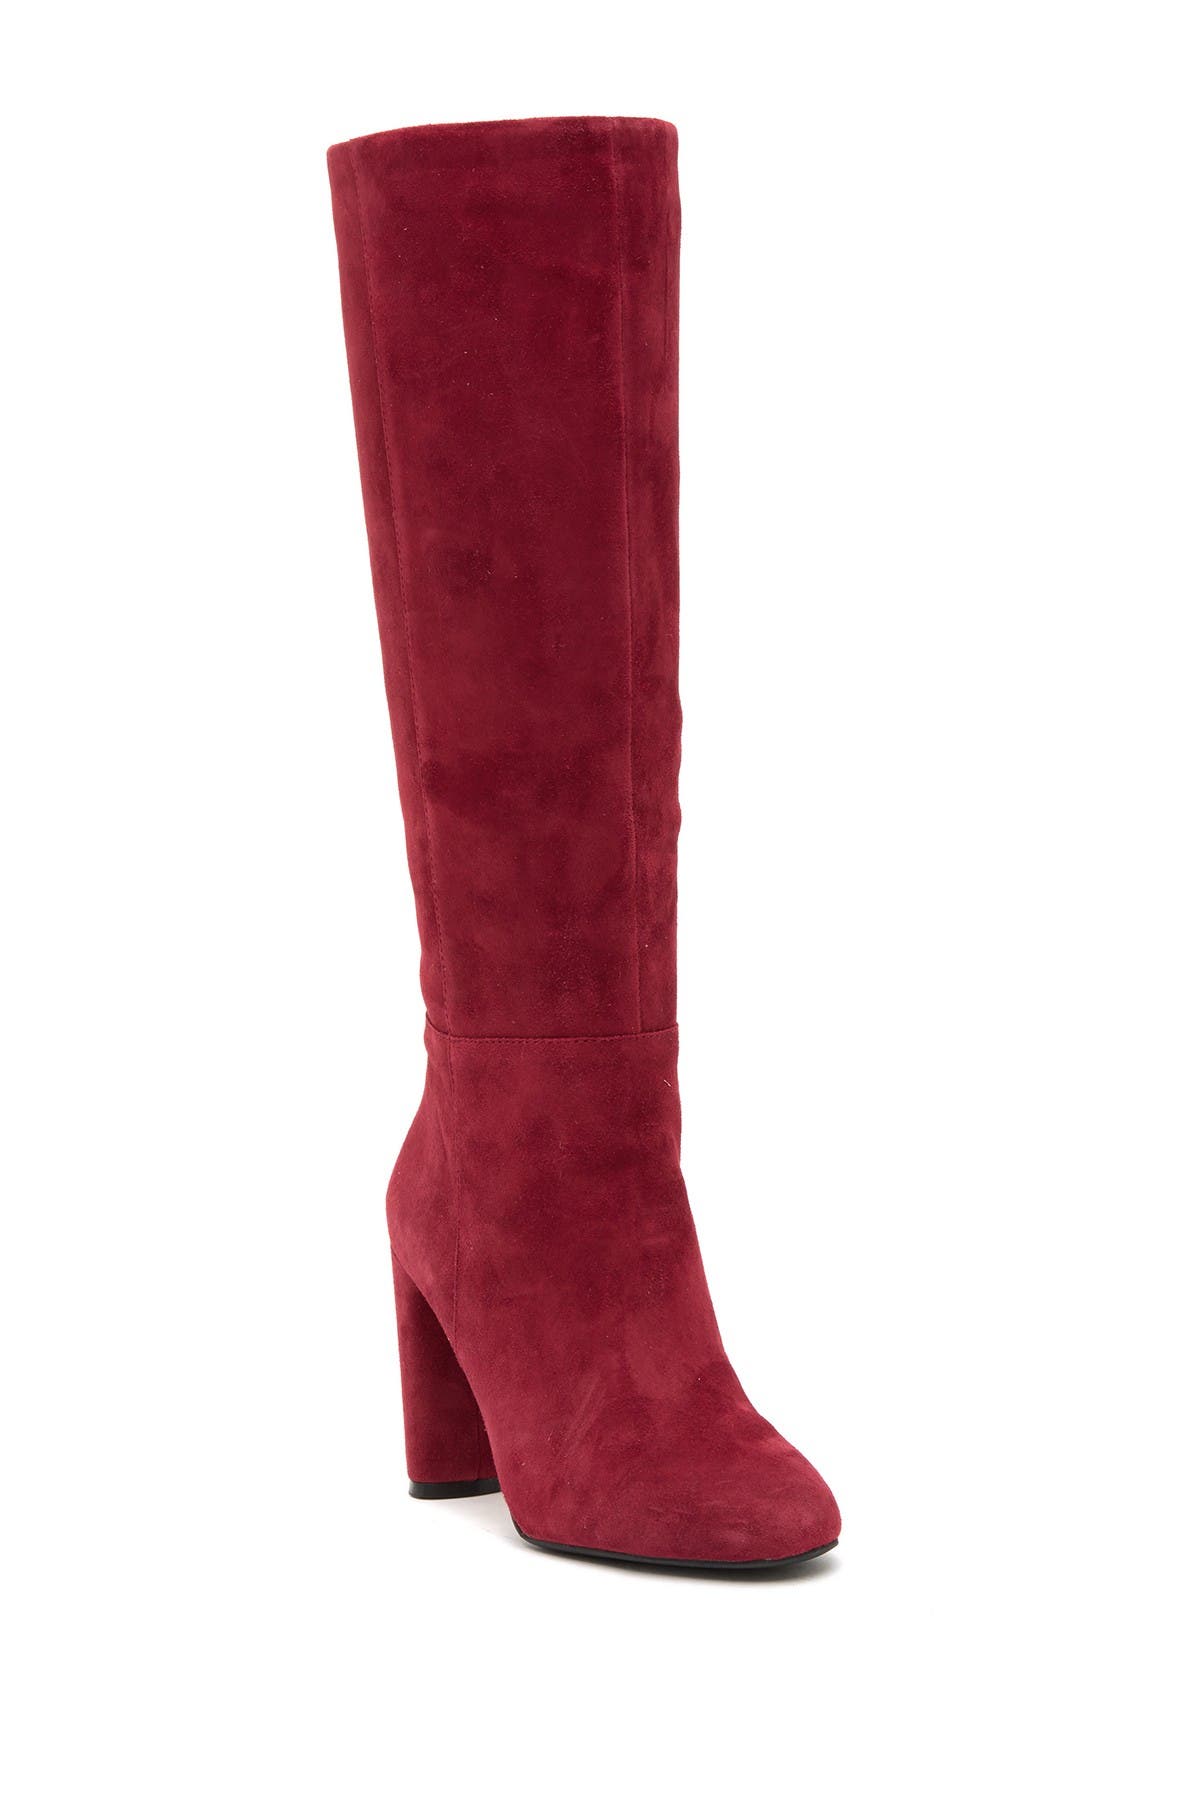 Vince Camuto | Femmie Tall Shaft Boot 